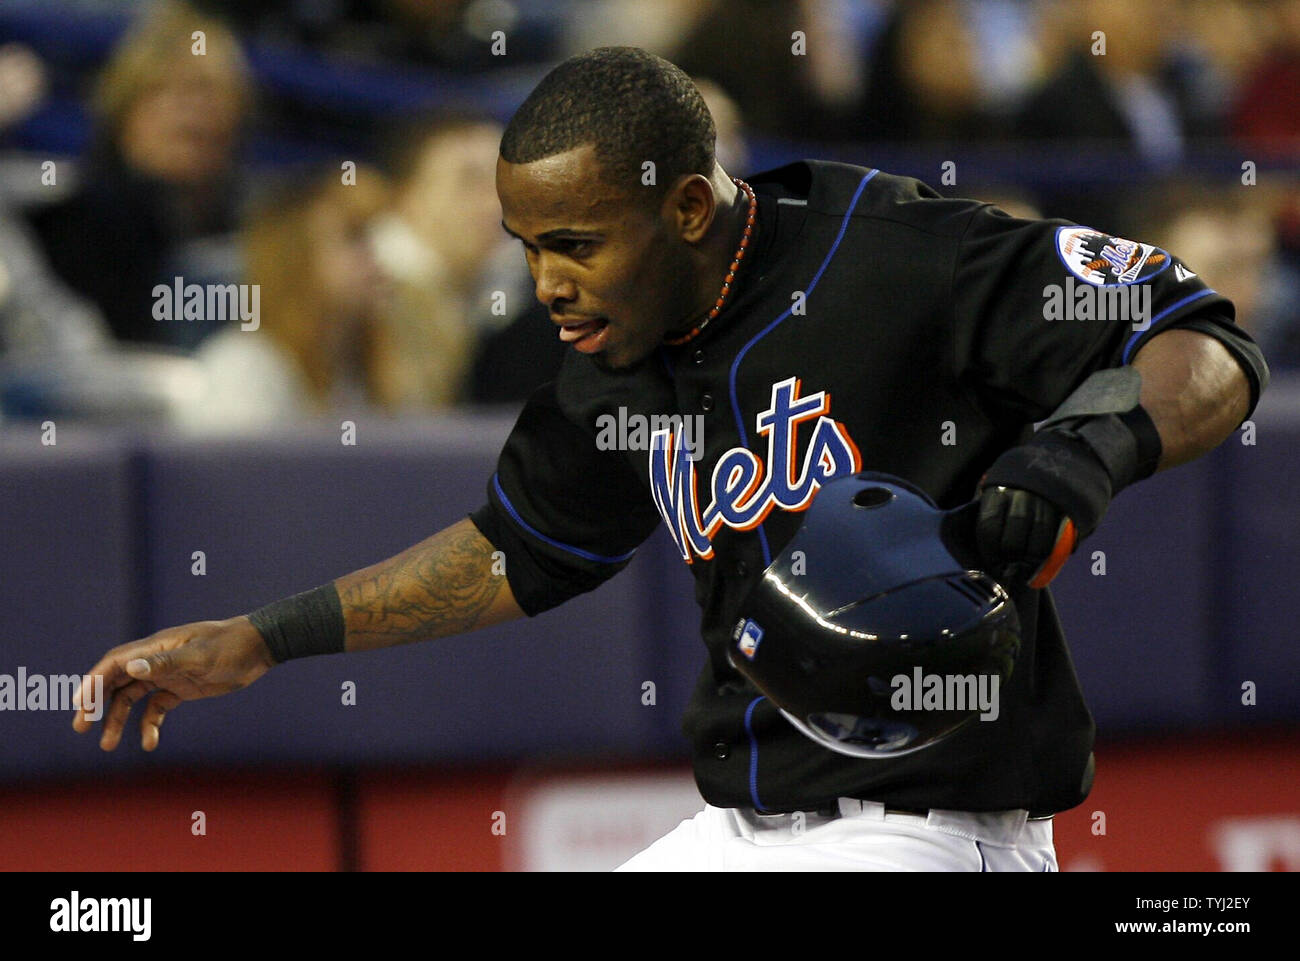 New York Mets Jose Reyes takes off his helmet and runs into the dug out  after scoring on a sacrifice fly against the New York Yankees in the first  inning at Shea